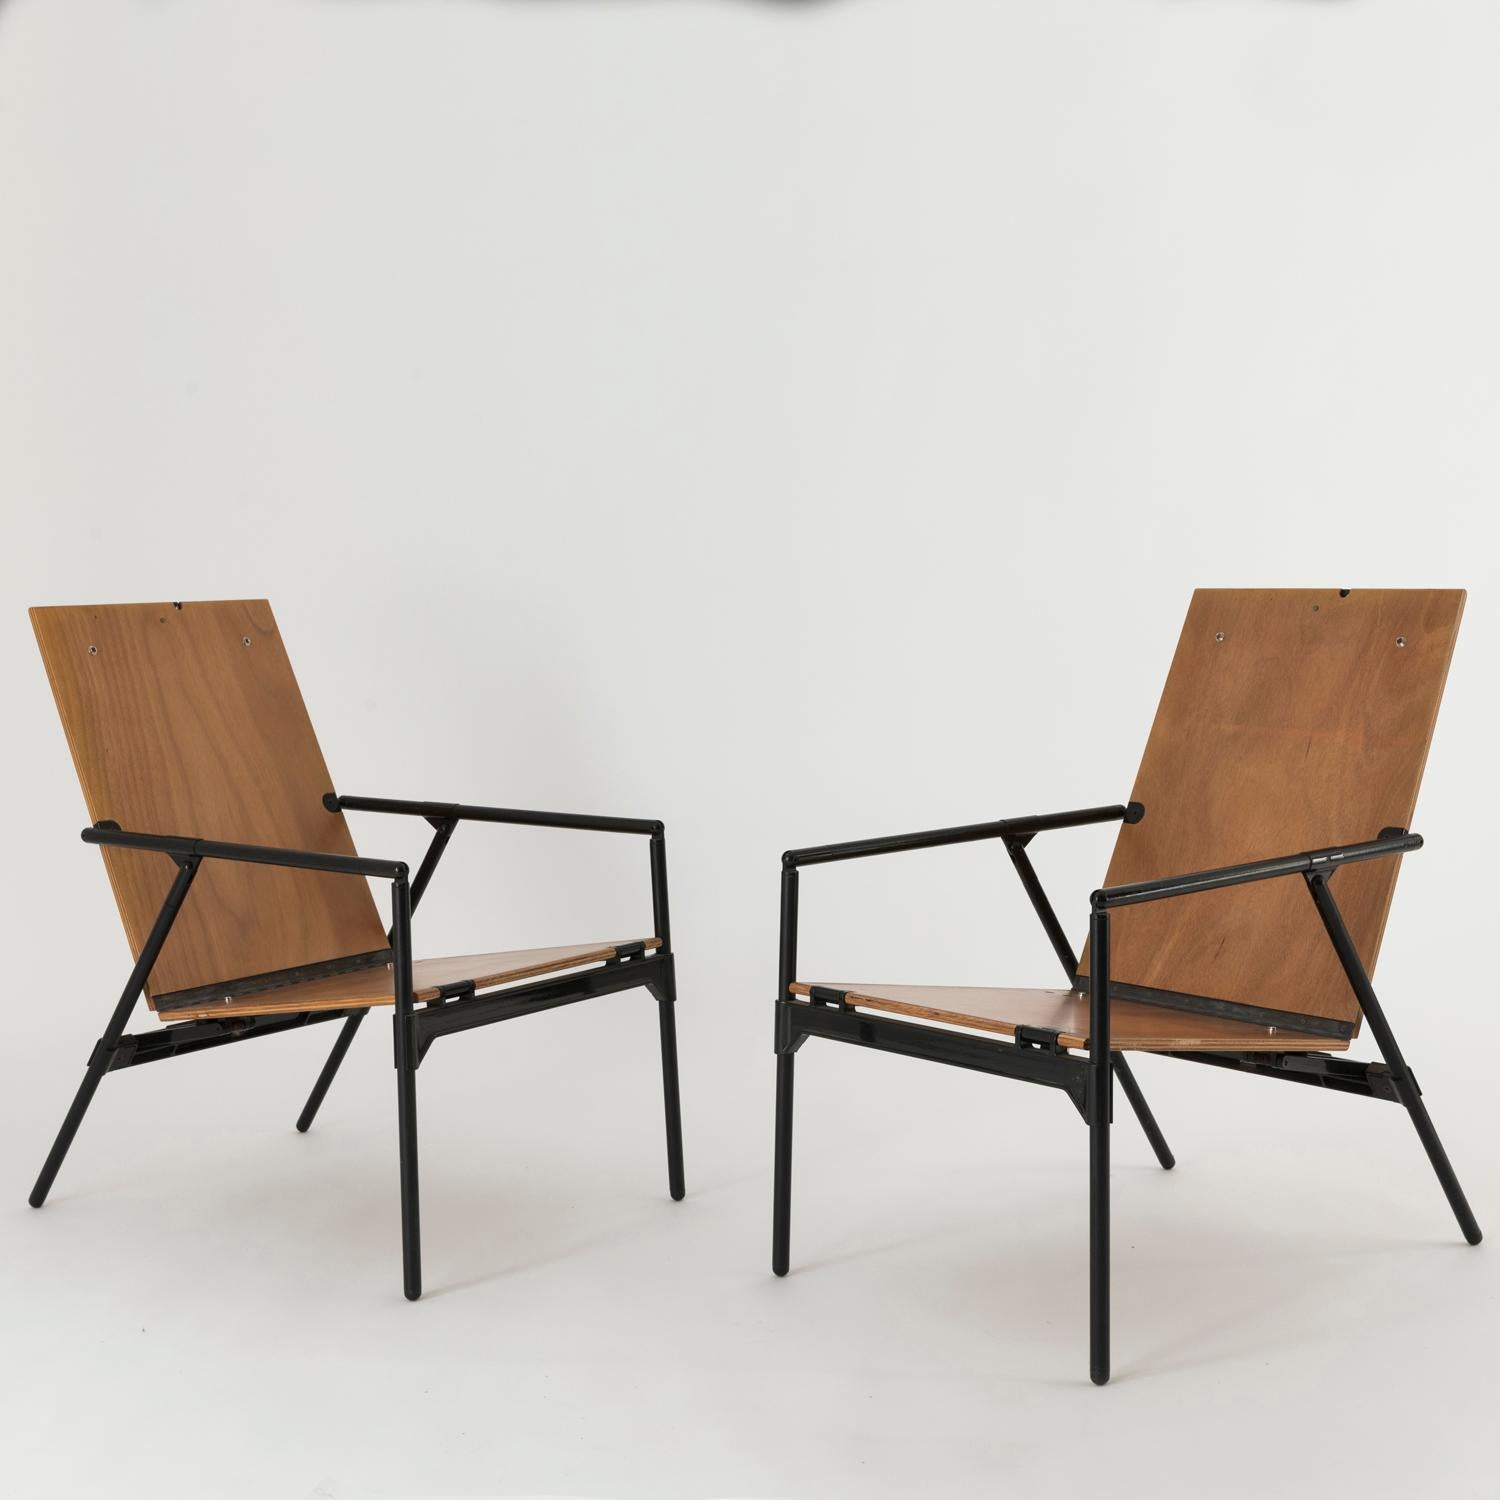 Pair of Nena armchairs designed by Richard Sapper in 1984, thanks to a deep study over materials and function, these armchairs are very light and easy to fold and hang.